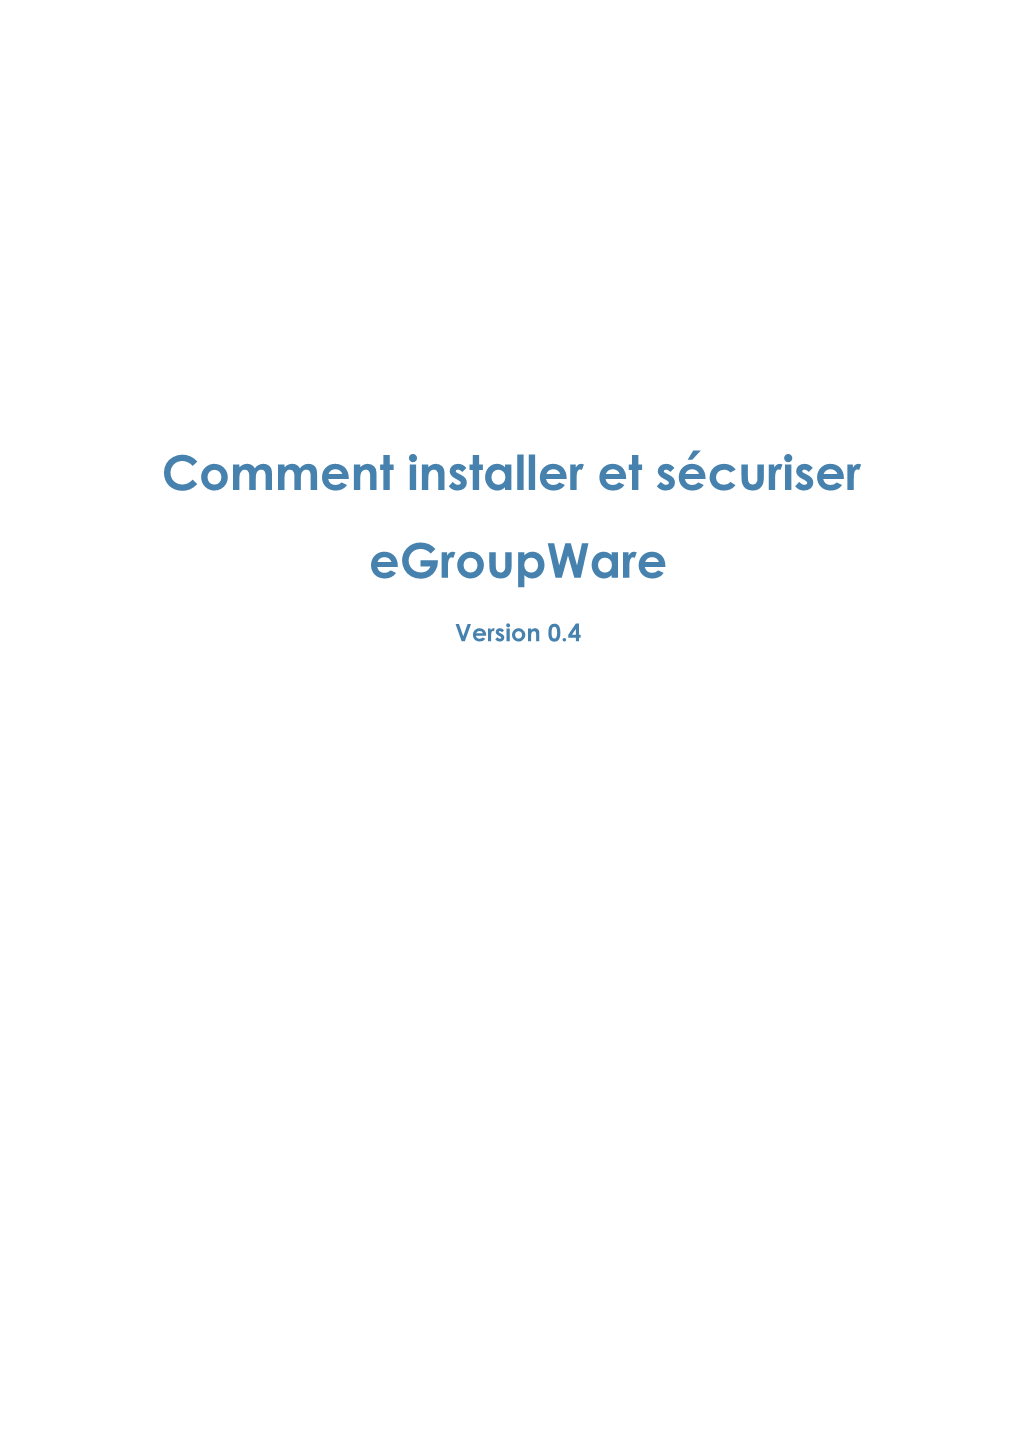 How to Install and Secure Egroupware